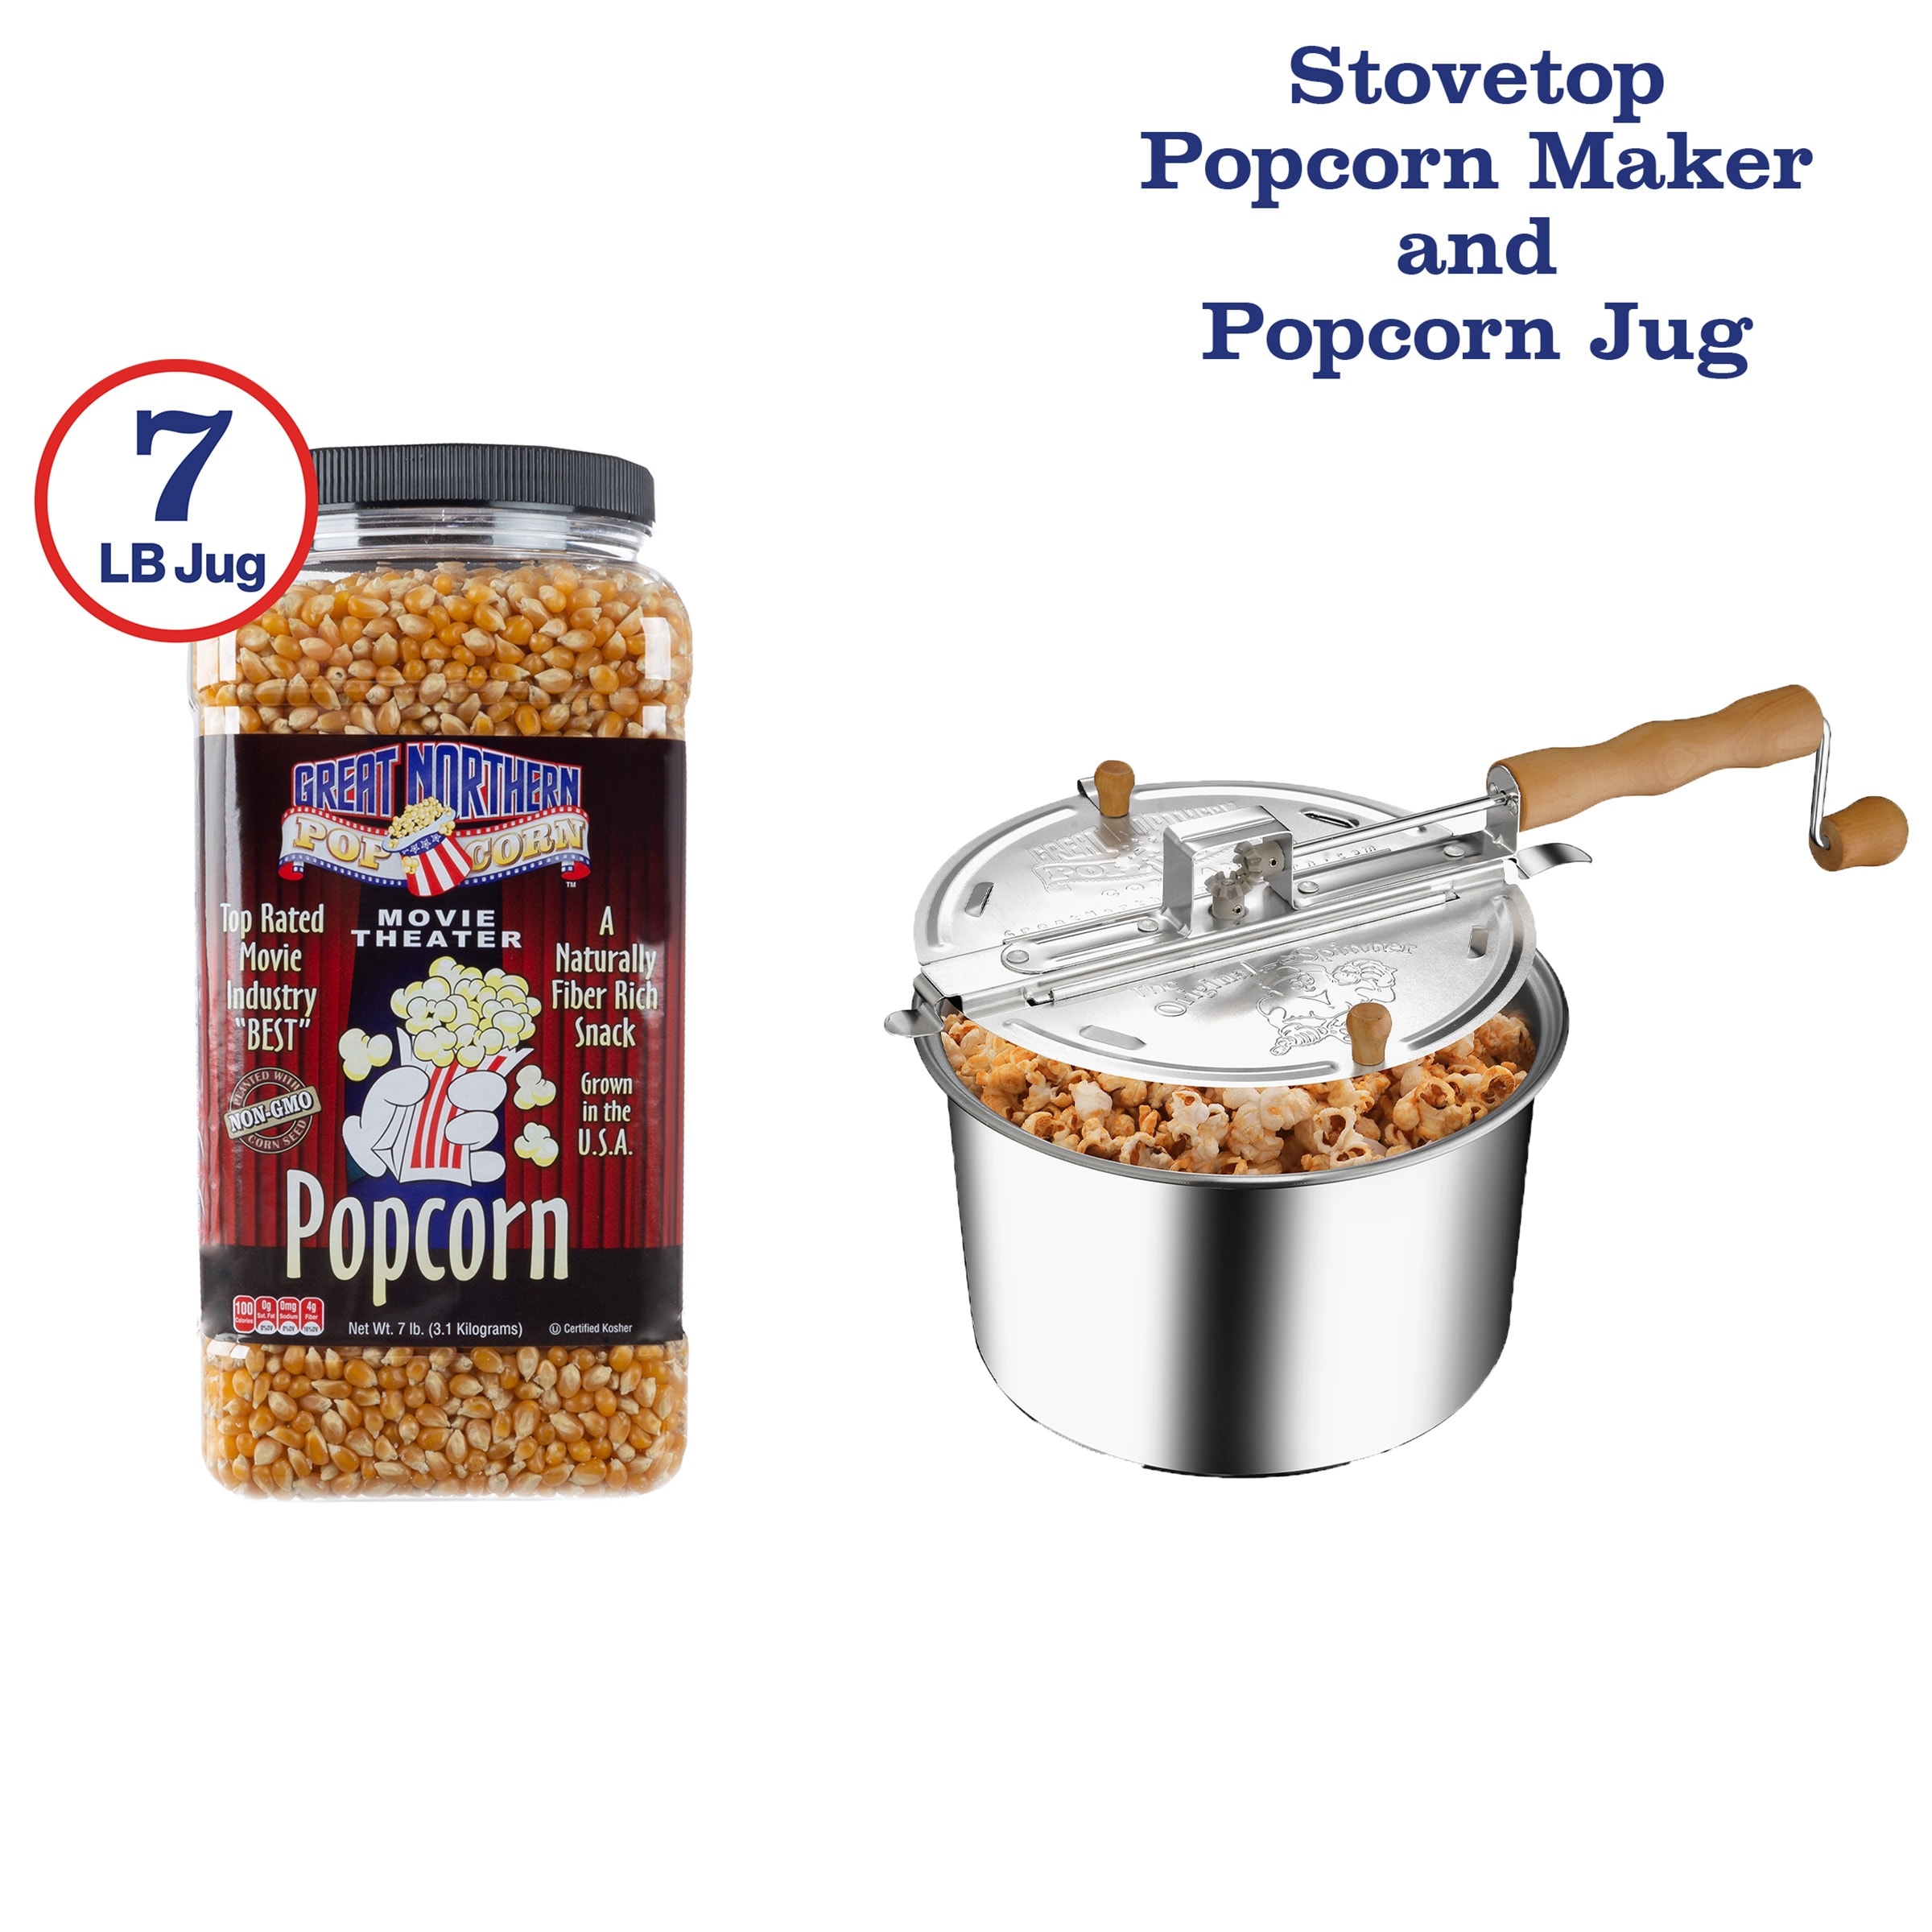 https://ak1.ostkcdn.com/images/products/is/images/direct/f44804253b8fdd36e94af3599a8a345349de26b4/Stove-Top-Popcorn-Maker-%E2%80%93-6.5-Quart-Stainless-Steel-Popper-with-7lbs-of-Popping-Corn-Kernels-by-Great-Northern-Popcorn.jpg